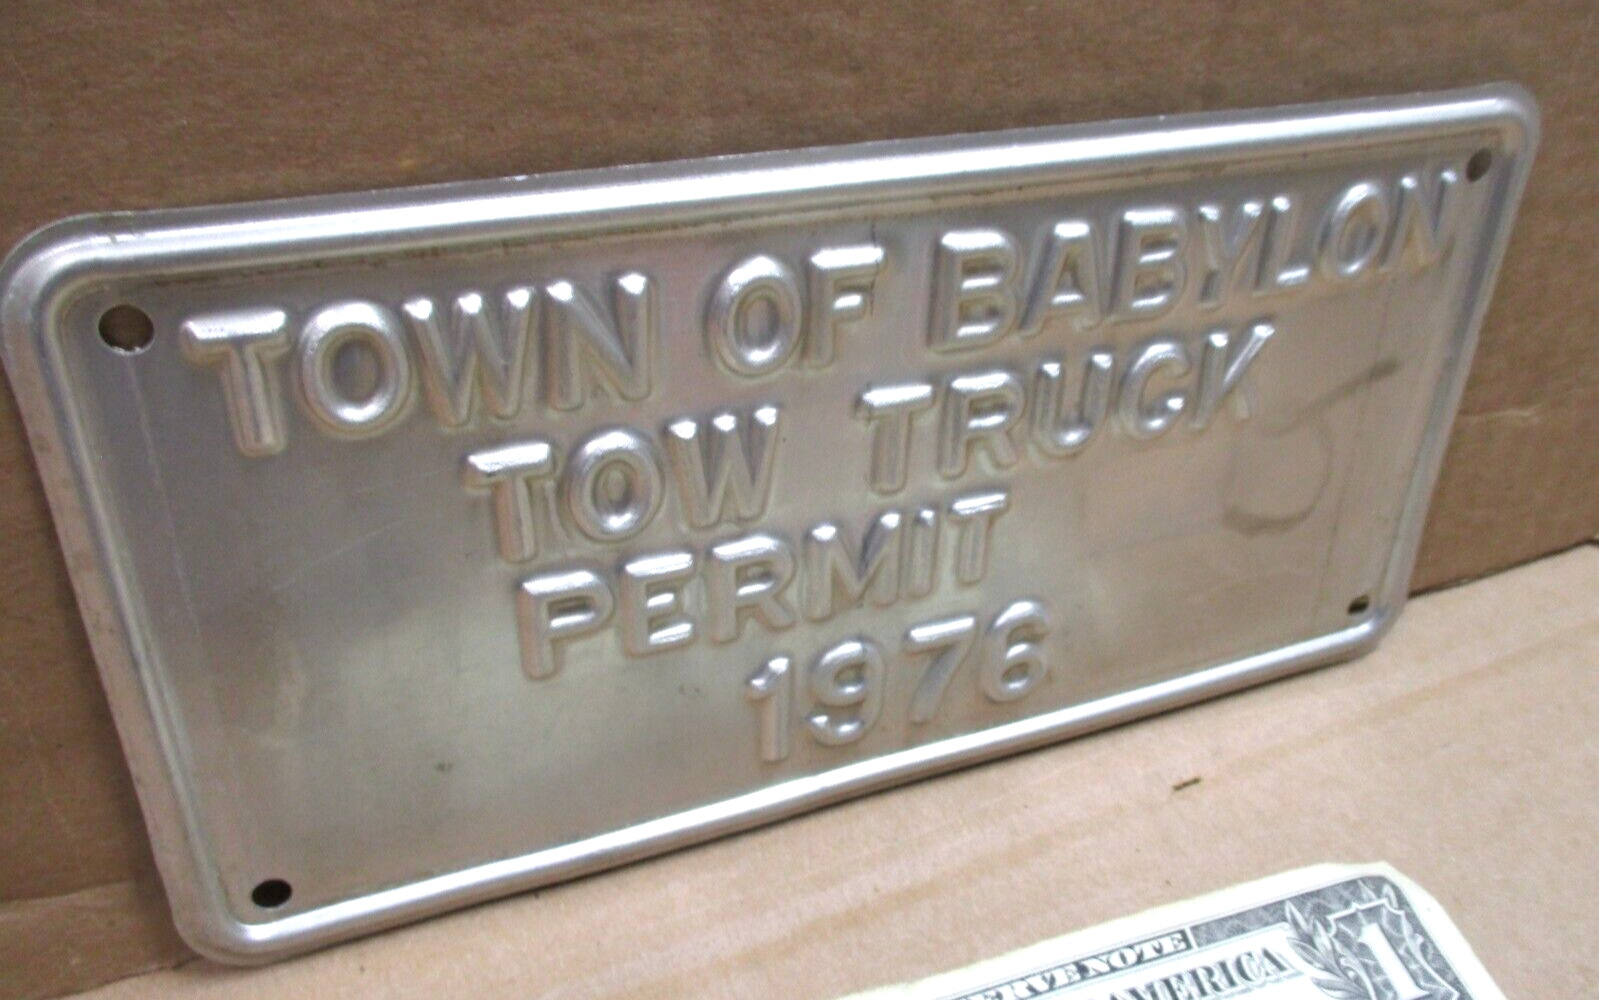 TOW TRUCK PERMIT Town of Babylon OLD ORIGINAL Sign Tag SCARCE 1976 License Plate